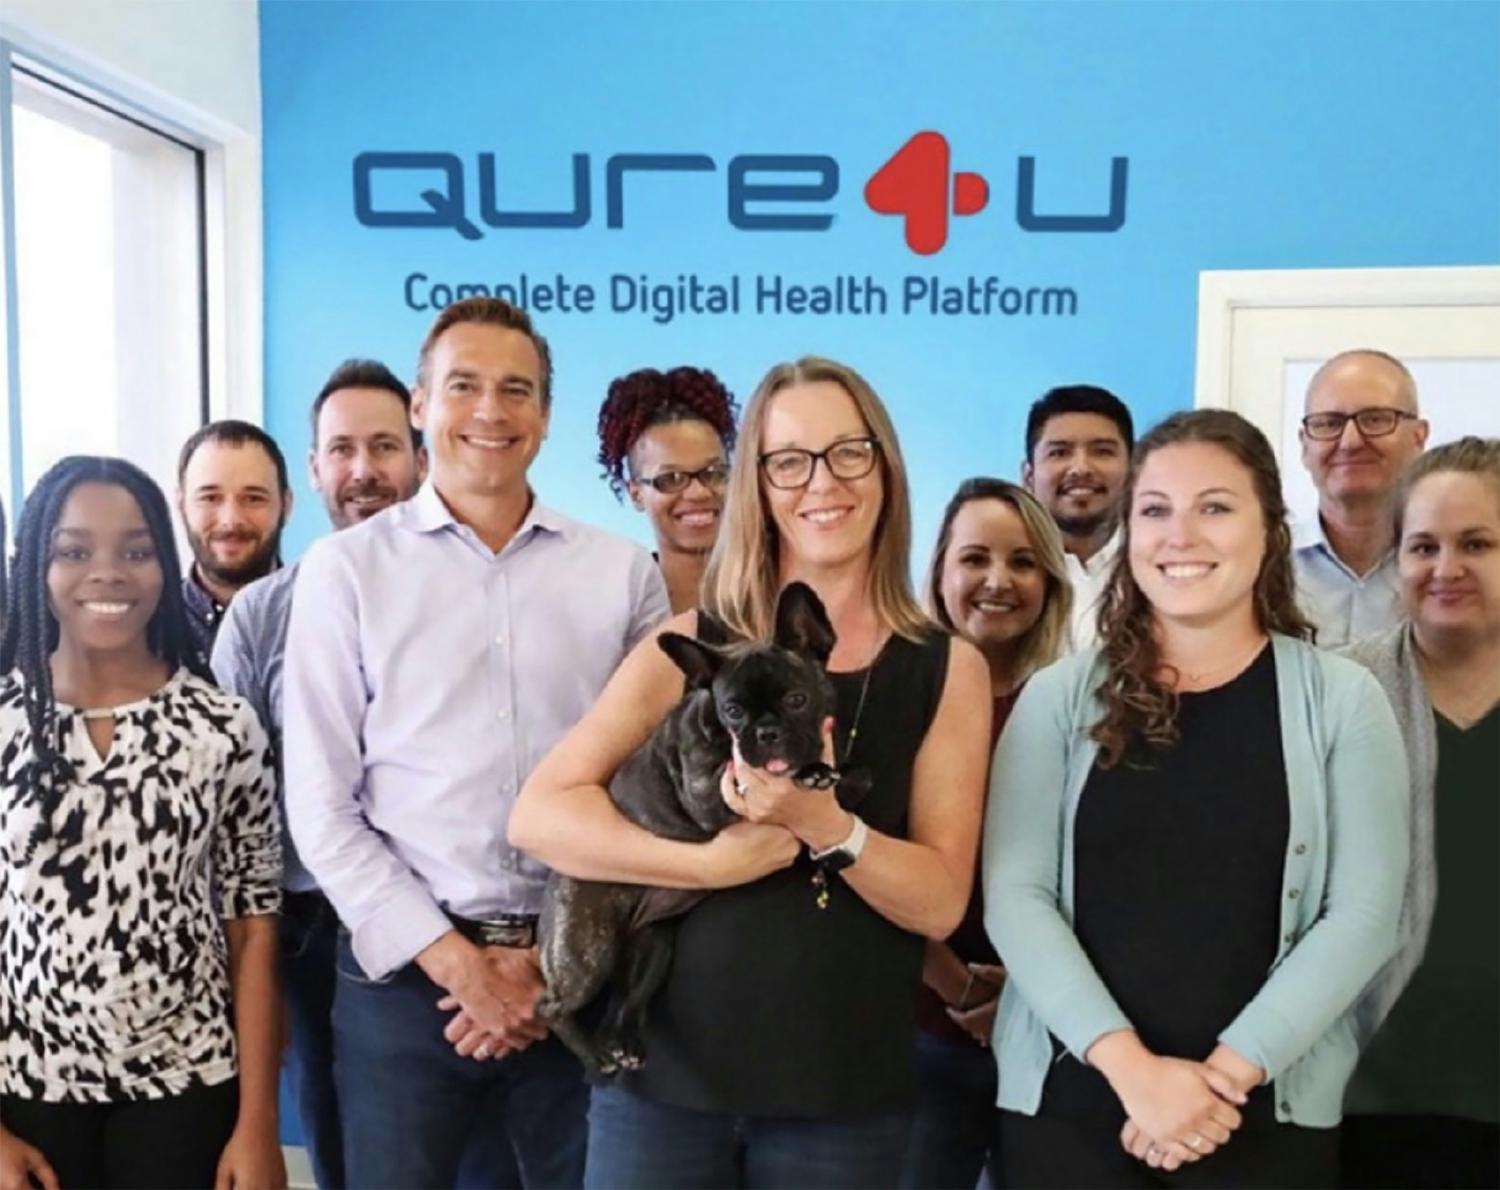 The Qure4u team is comprised of some of the most talented people in the healthcare IT industry.